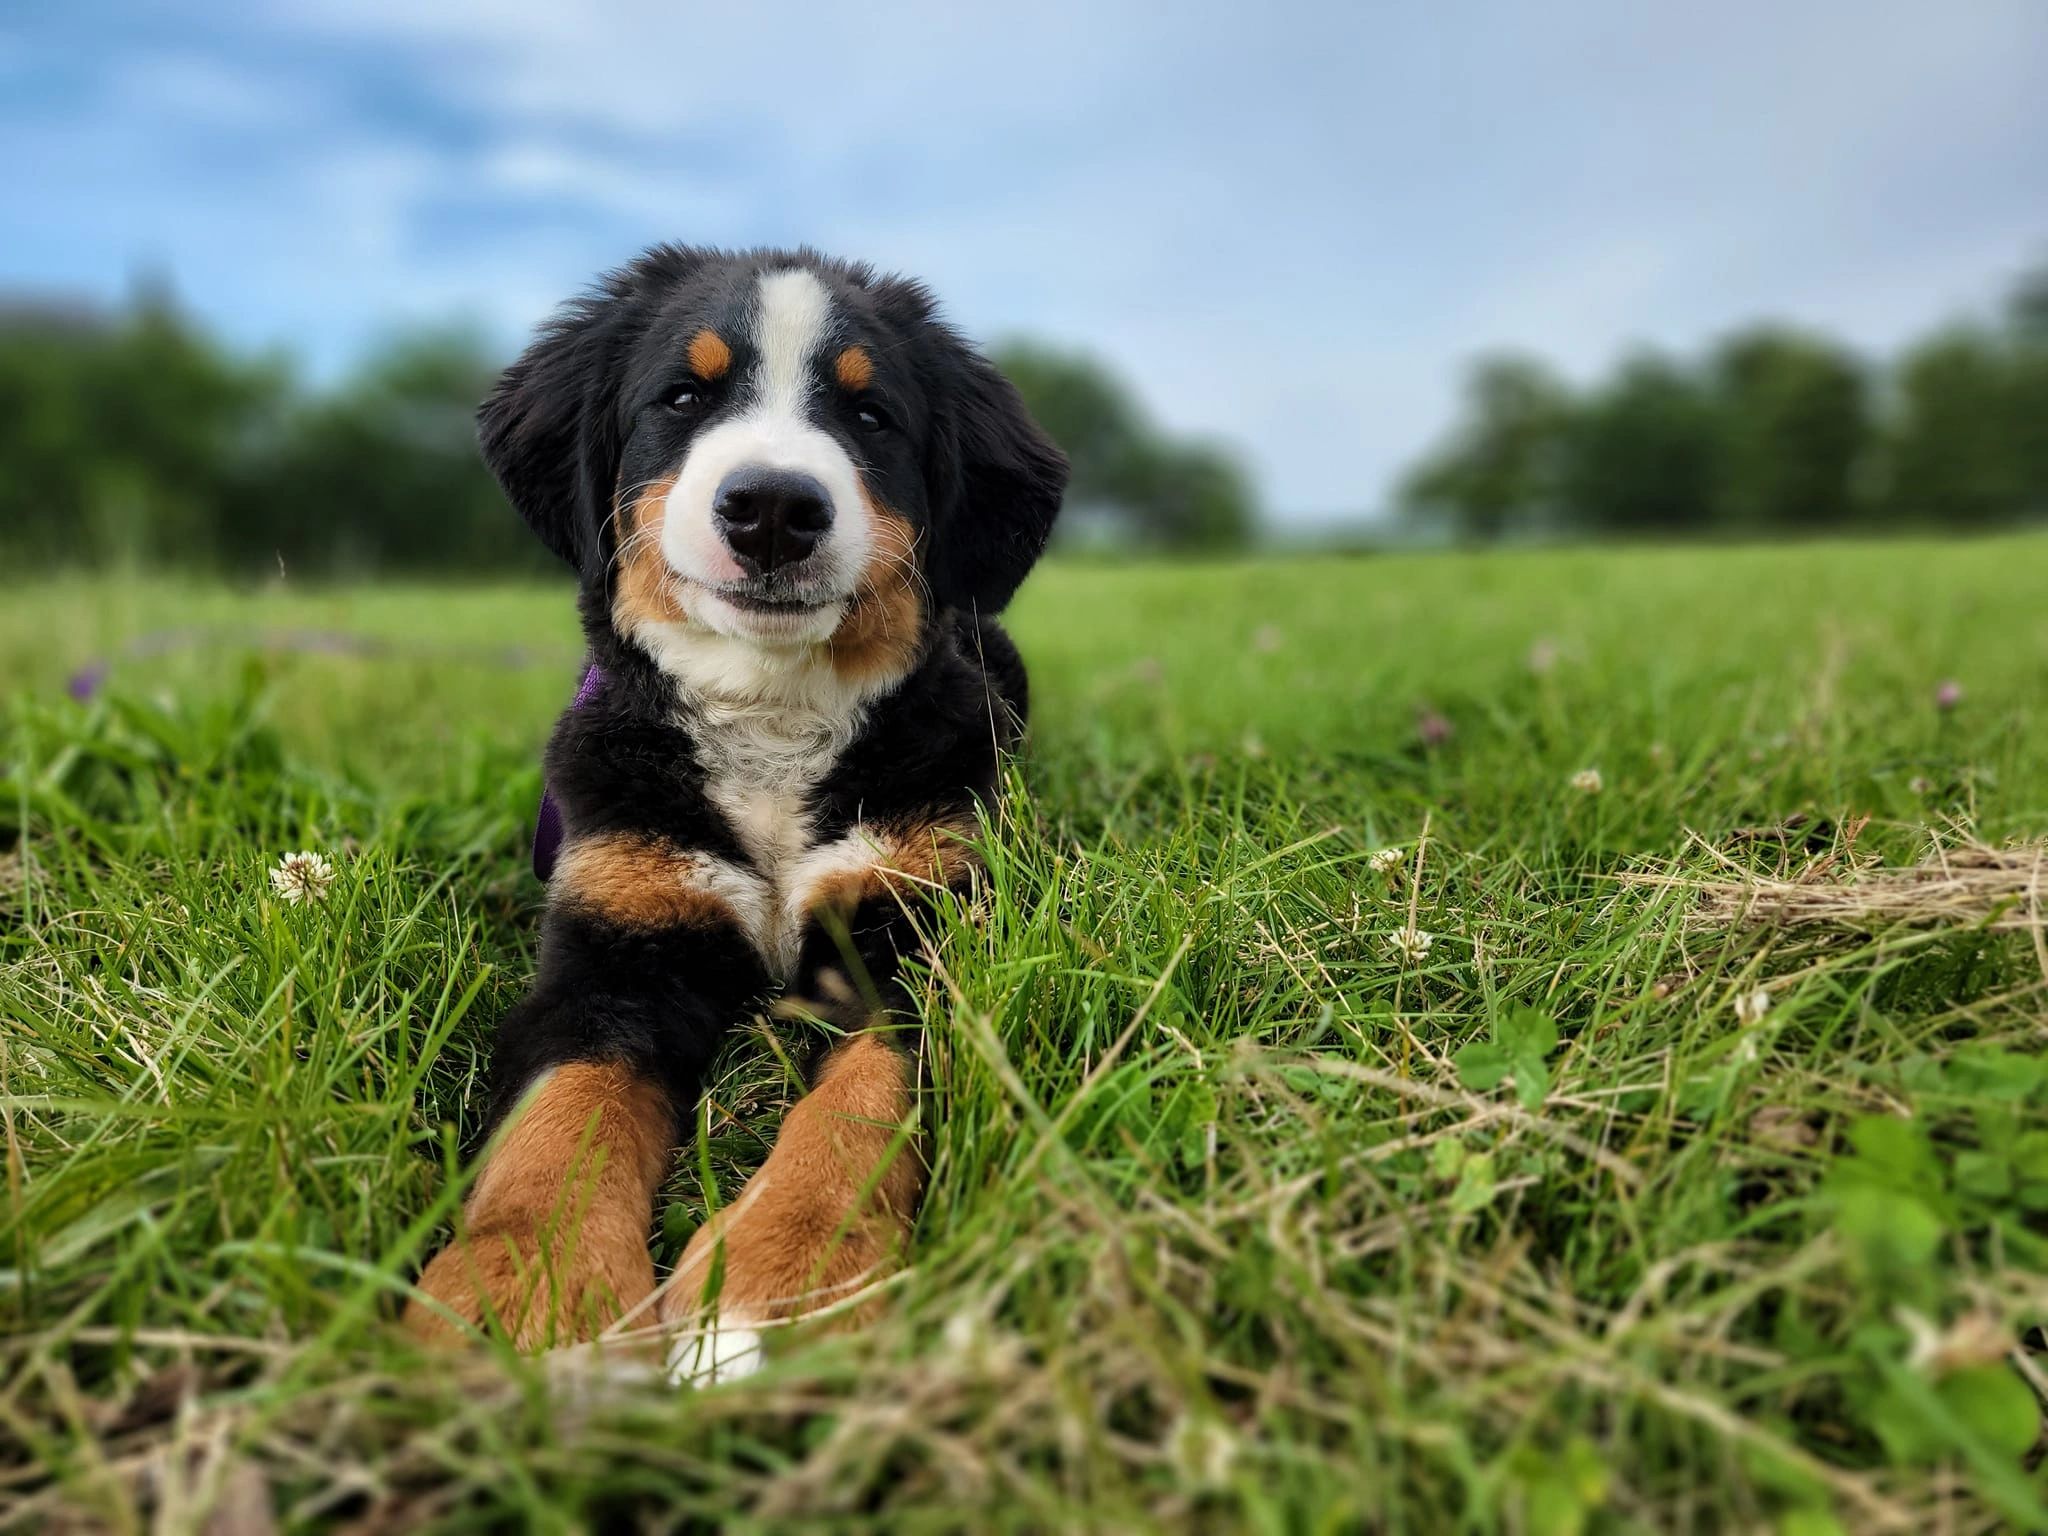 Black and tan Bernese Mountain dog puppy smiling in the grass